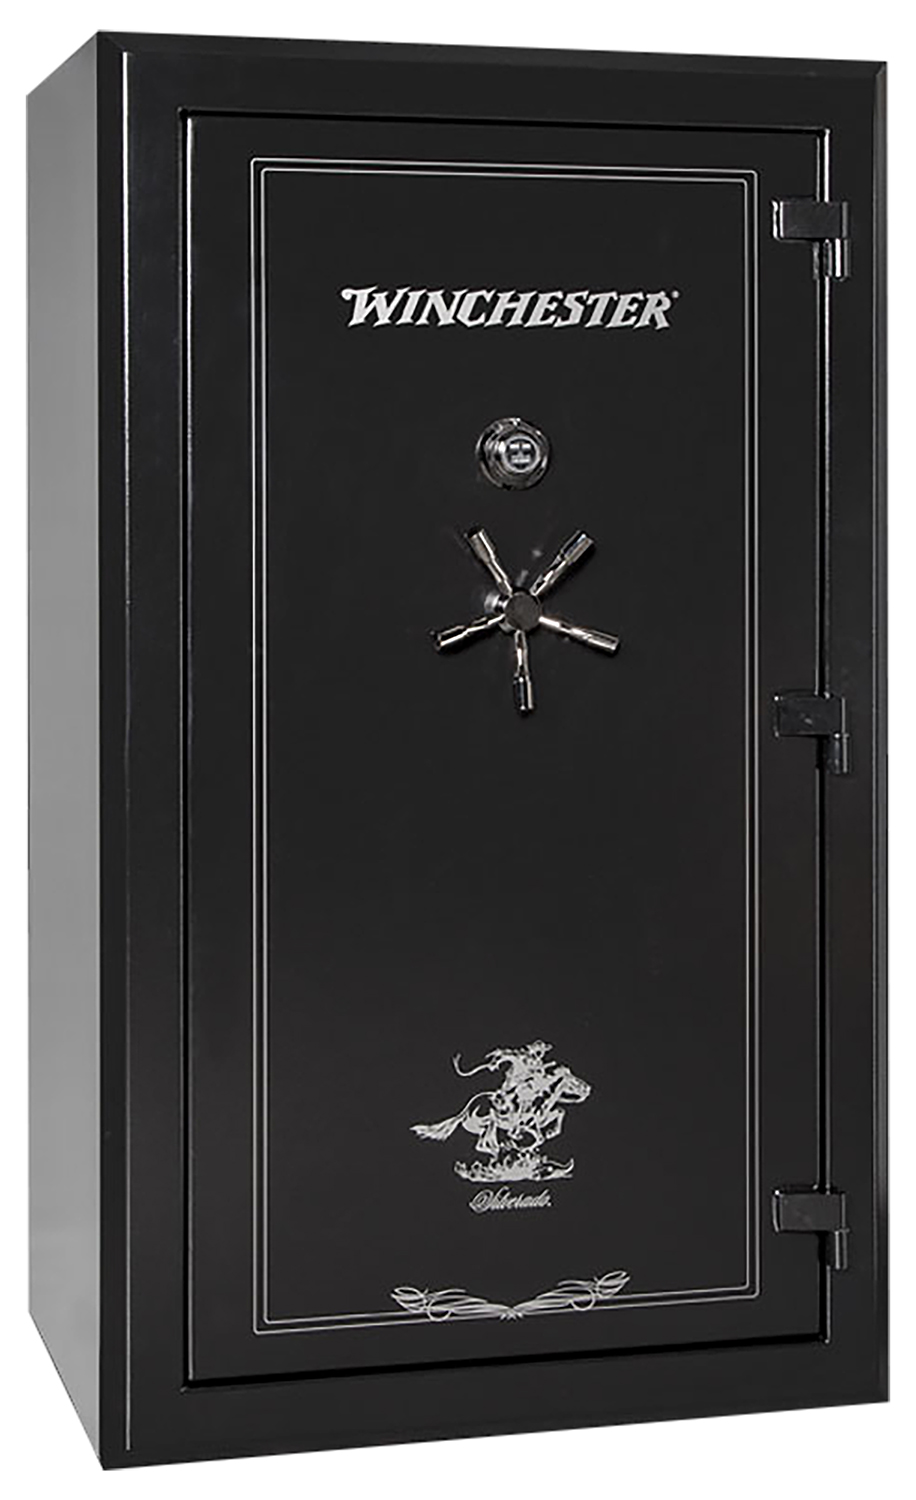 Winchester Safes  Silverado 51 Electronic Entry Black Powder Coat 10 Gauge Steel Holds Up to 48 Long Guns Fireproof- Yes